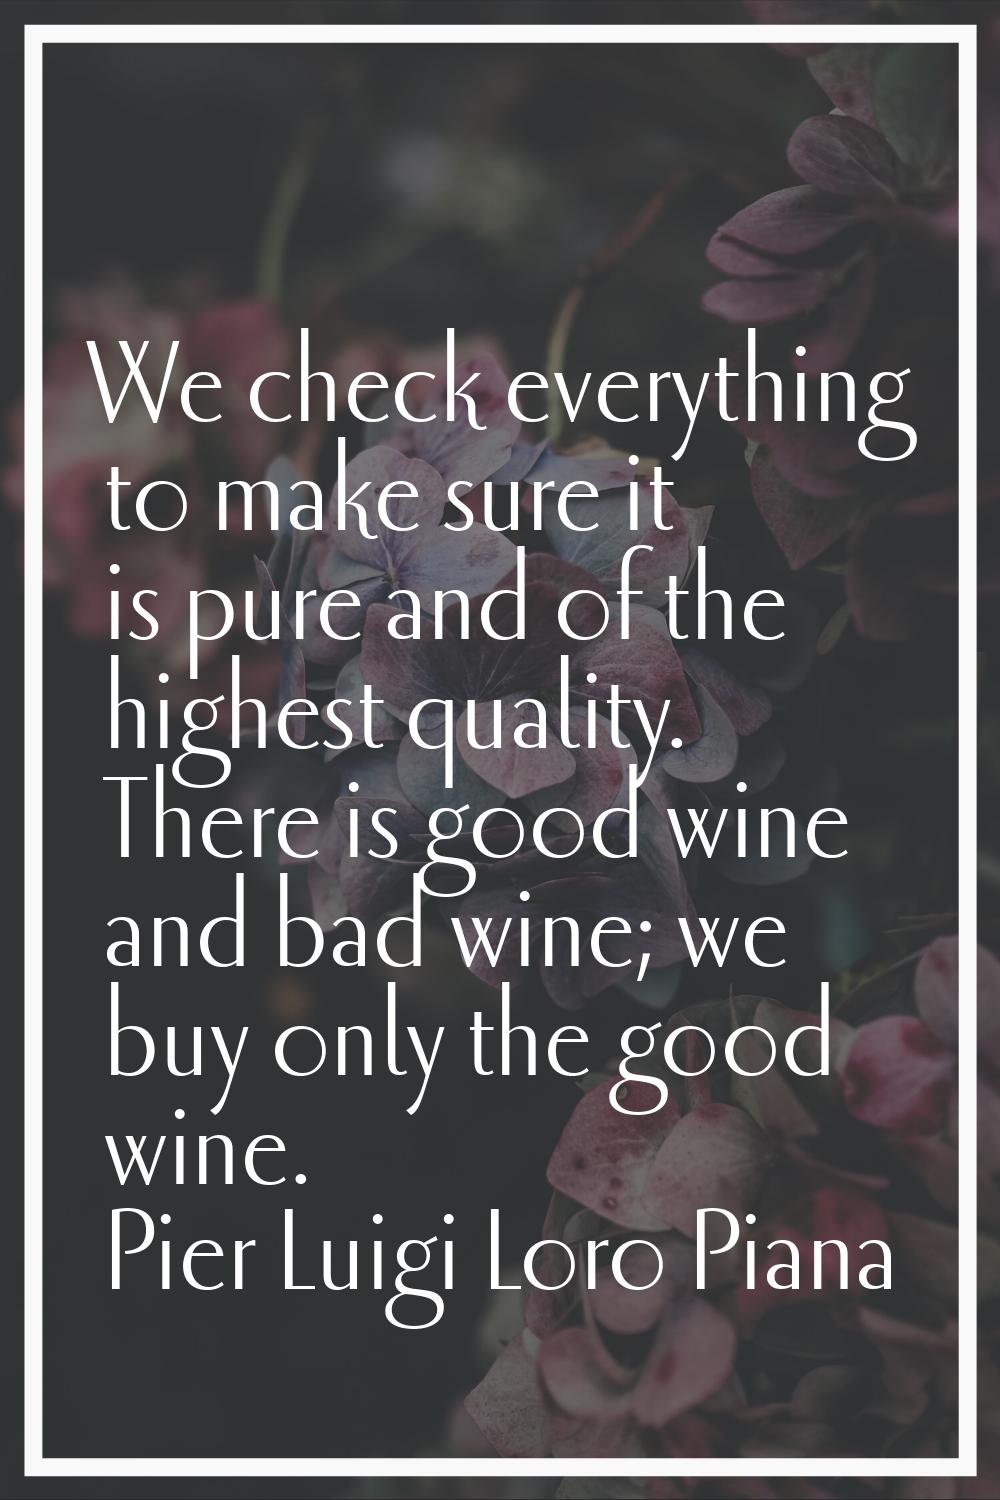 We check everything to make sure it is pure and of the highest quality. There is good wine and bad 